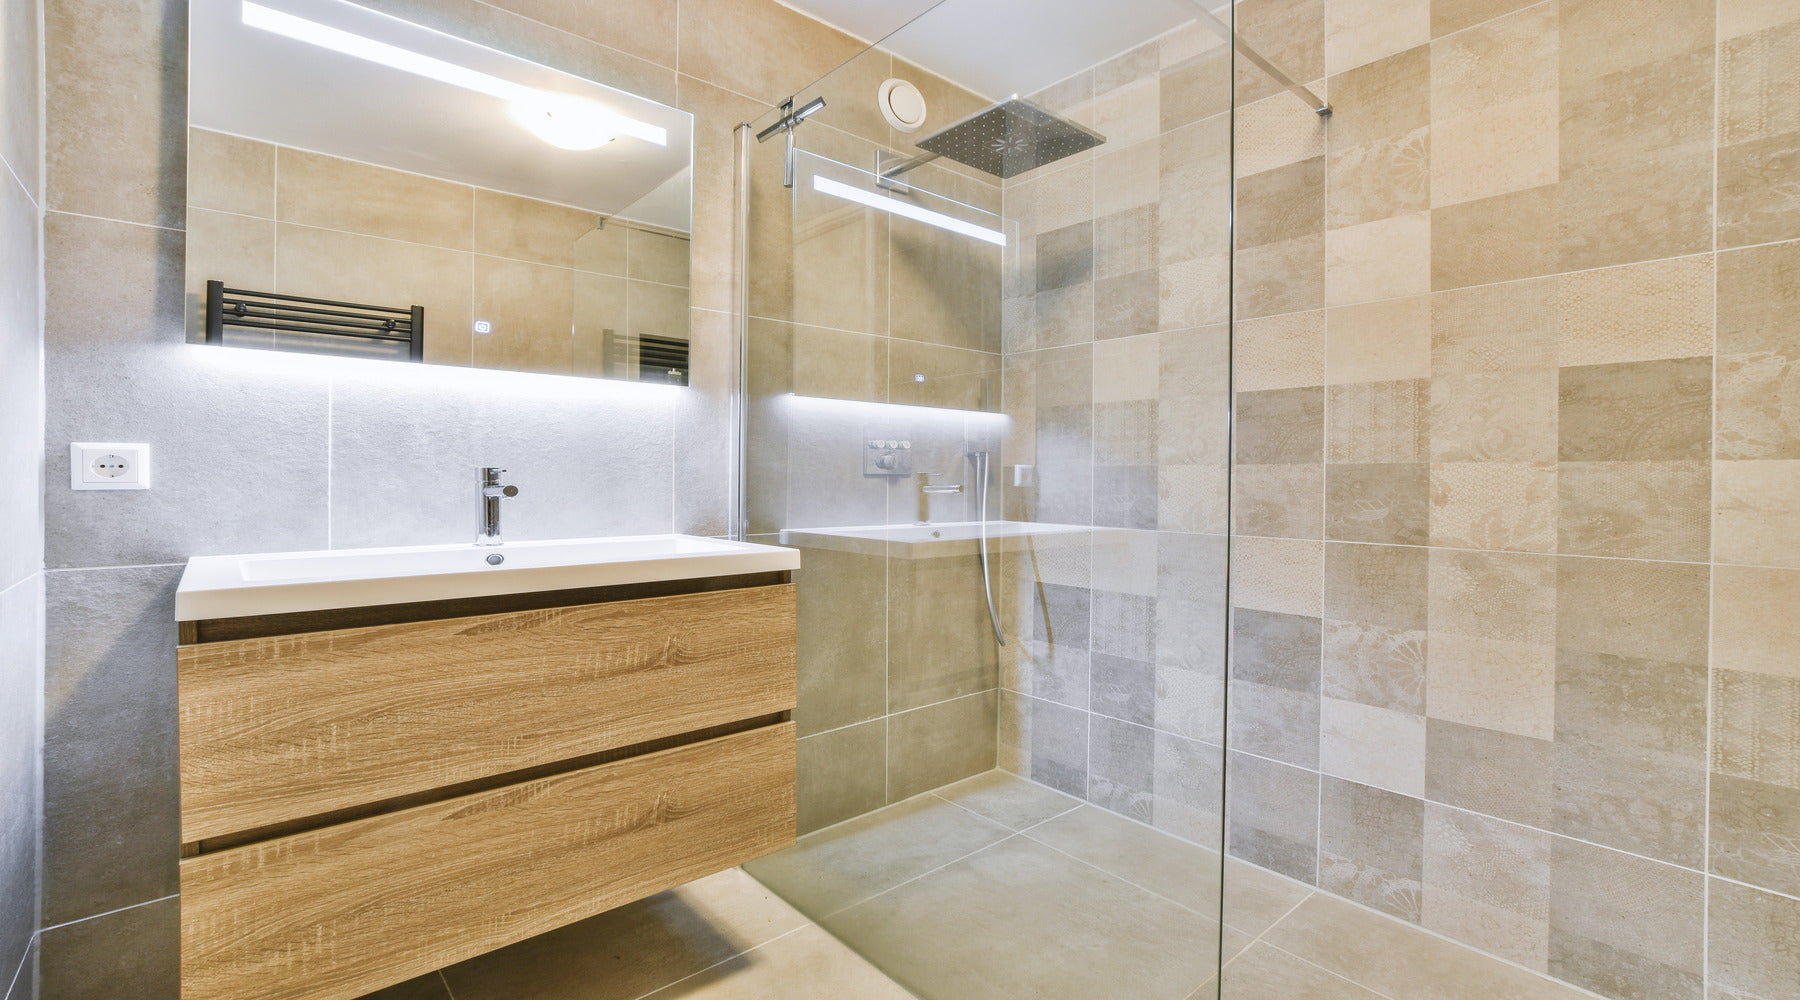 Modern bathroom with vanity being illuminated by LED tape lights installed behind glass mirror